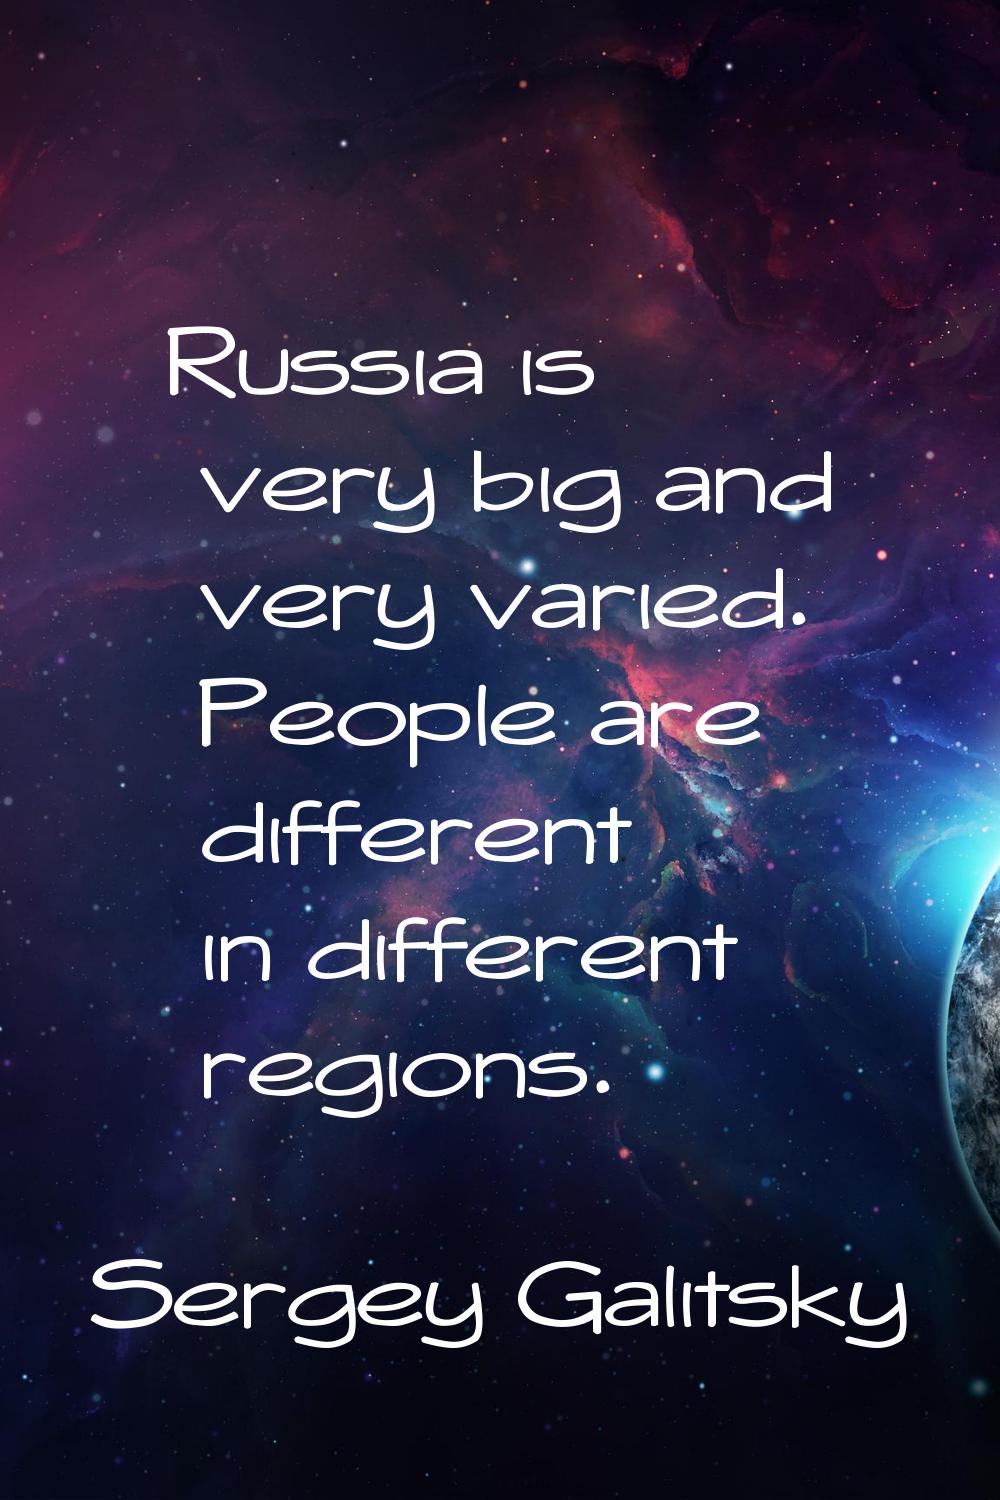 Russia is very big and very varied. People are different in different regions.